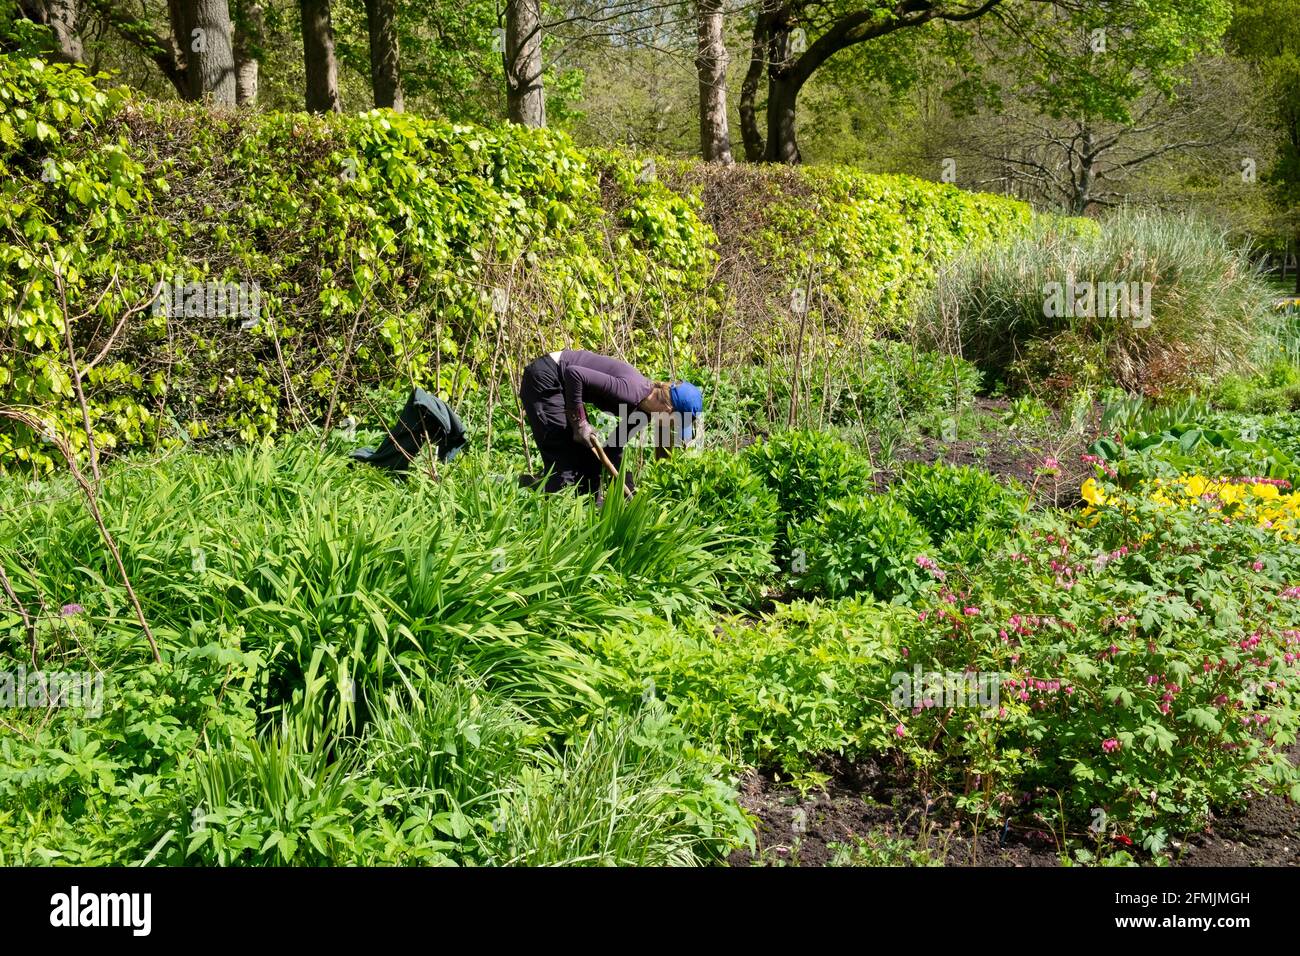 Gardener woman gardening in the herbaceous border in Bute Park  May 2021 spring dividing weeding transplanting plants Cardiff Wales UK KATHY DEWITT Stock Photo